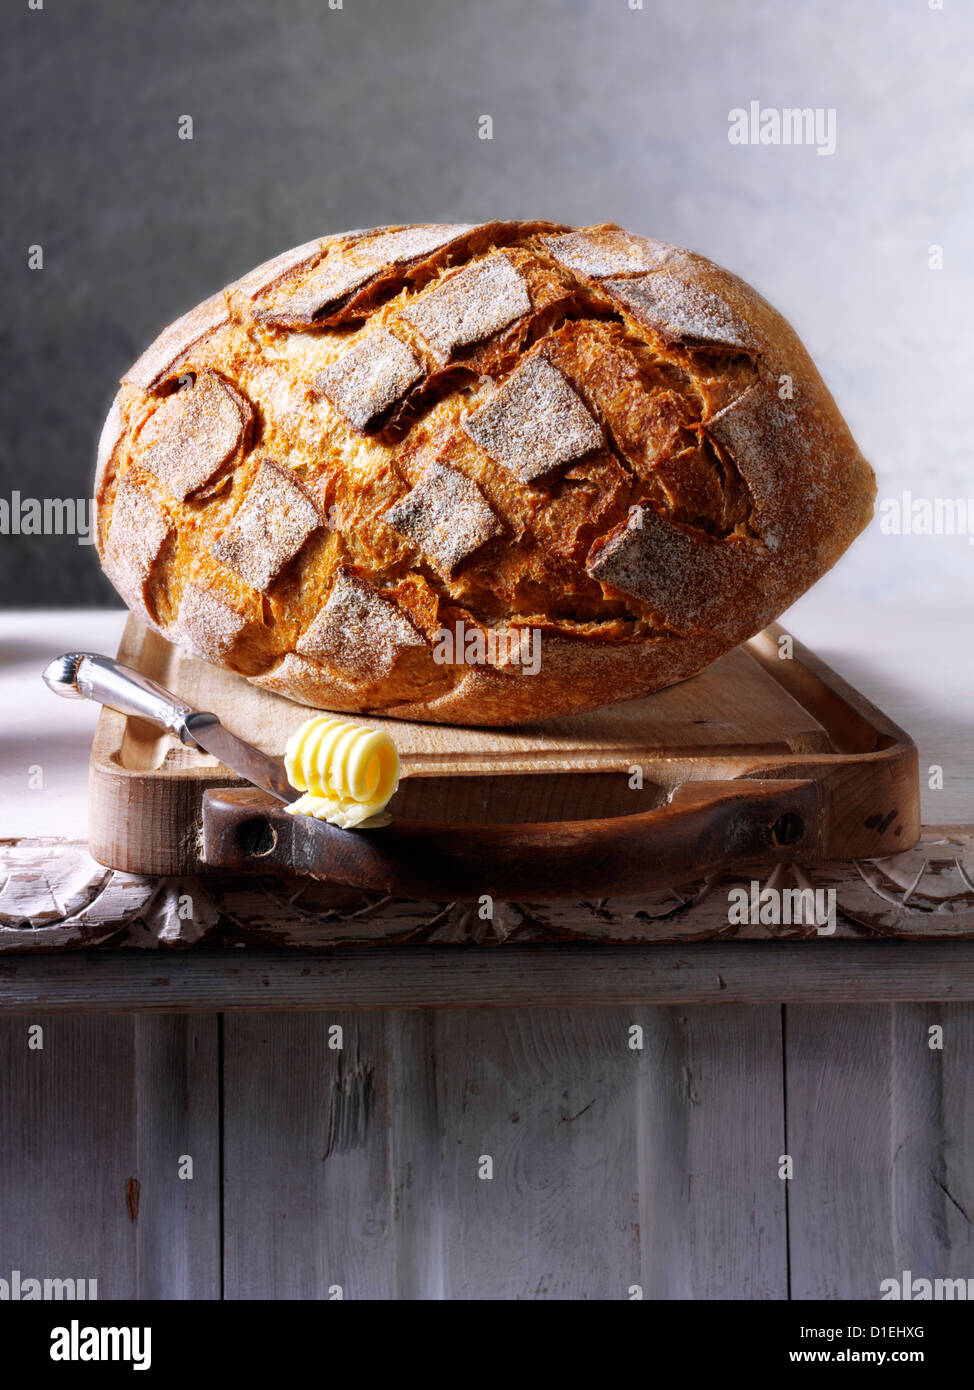 Artisan organic wholemeal bread loaf Stock Photo